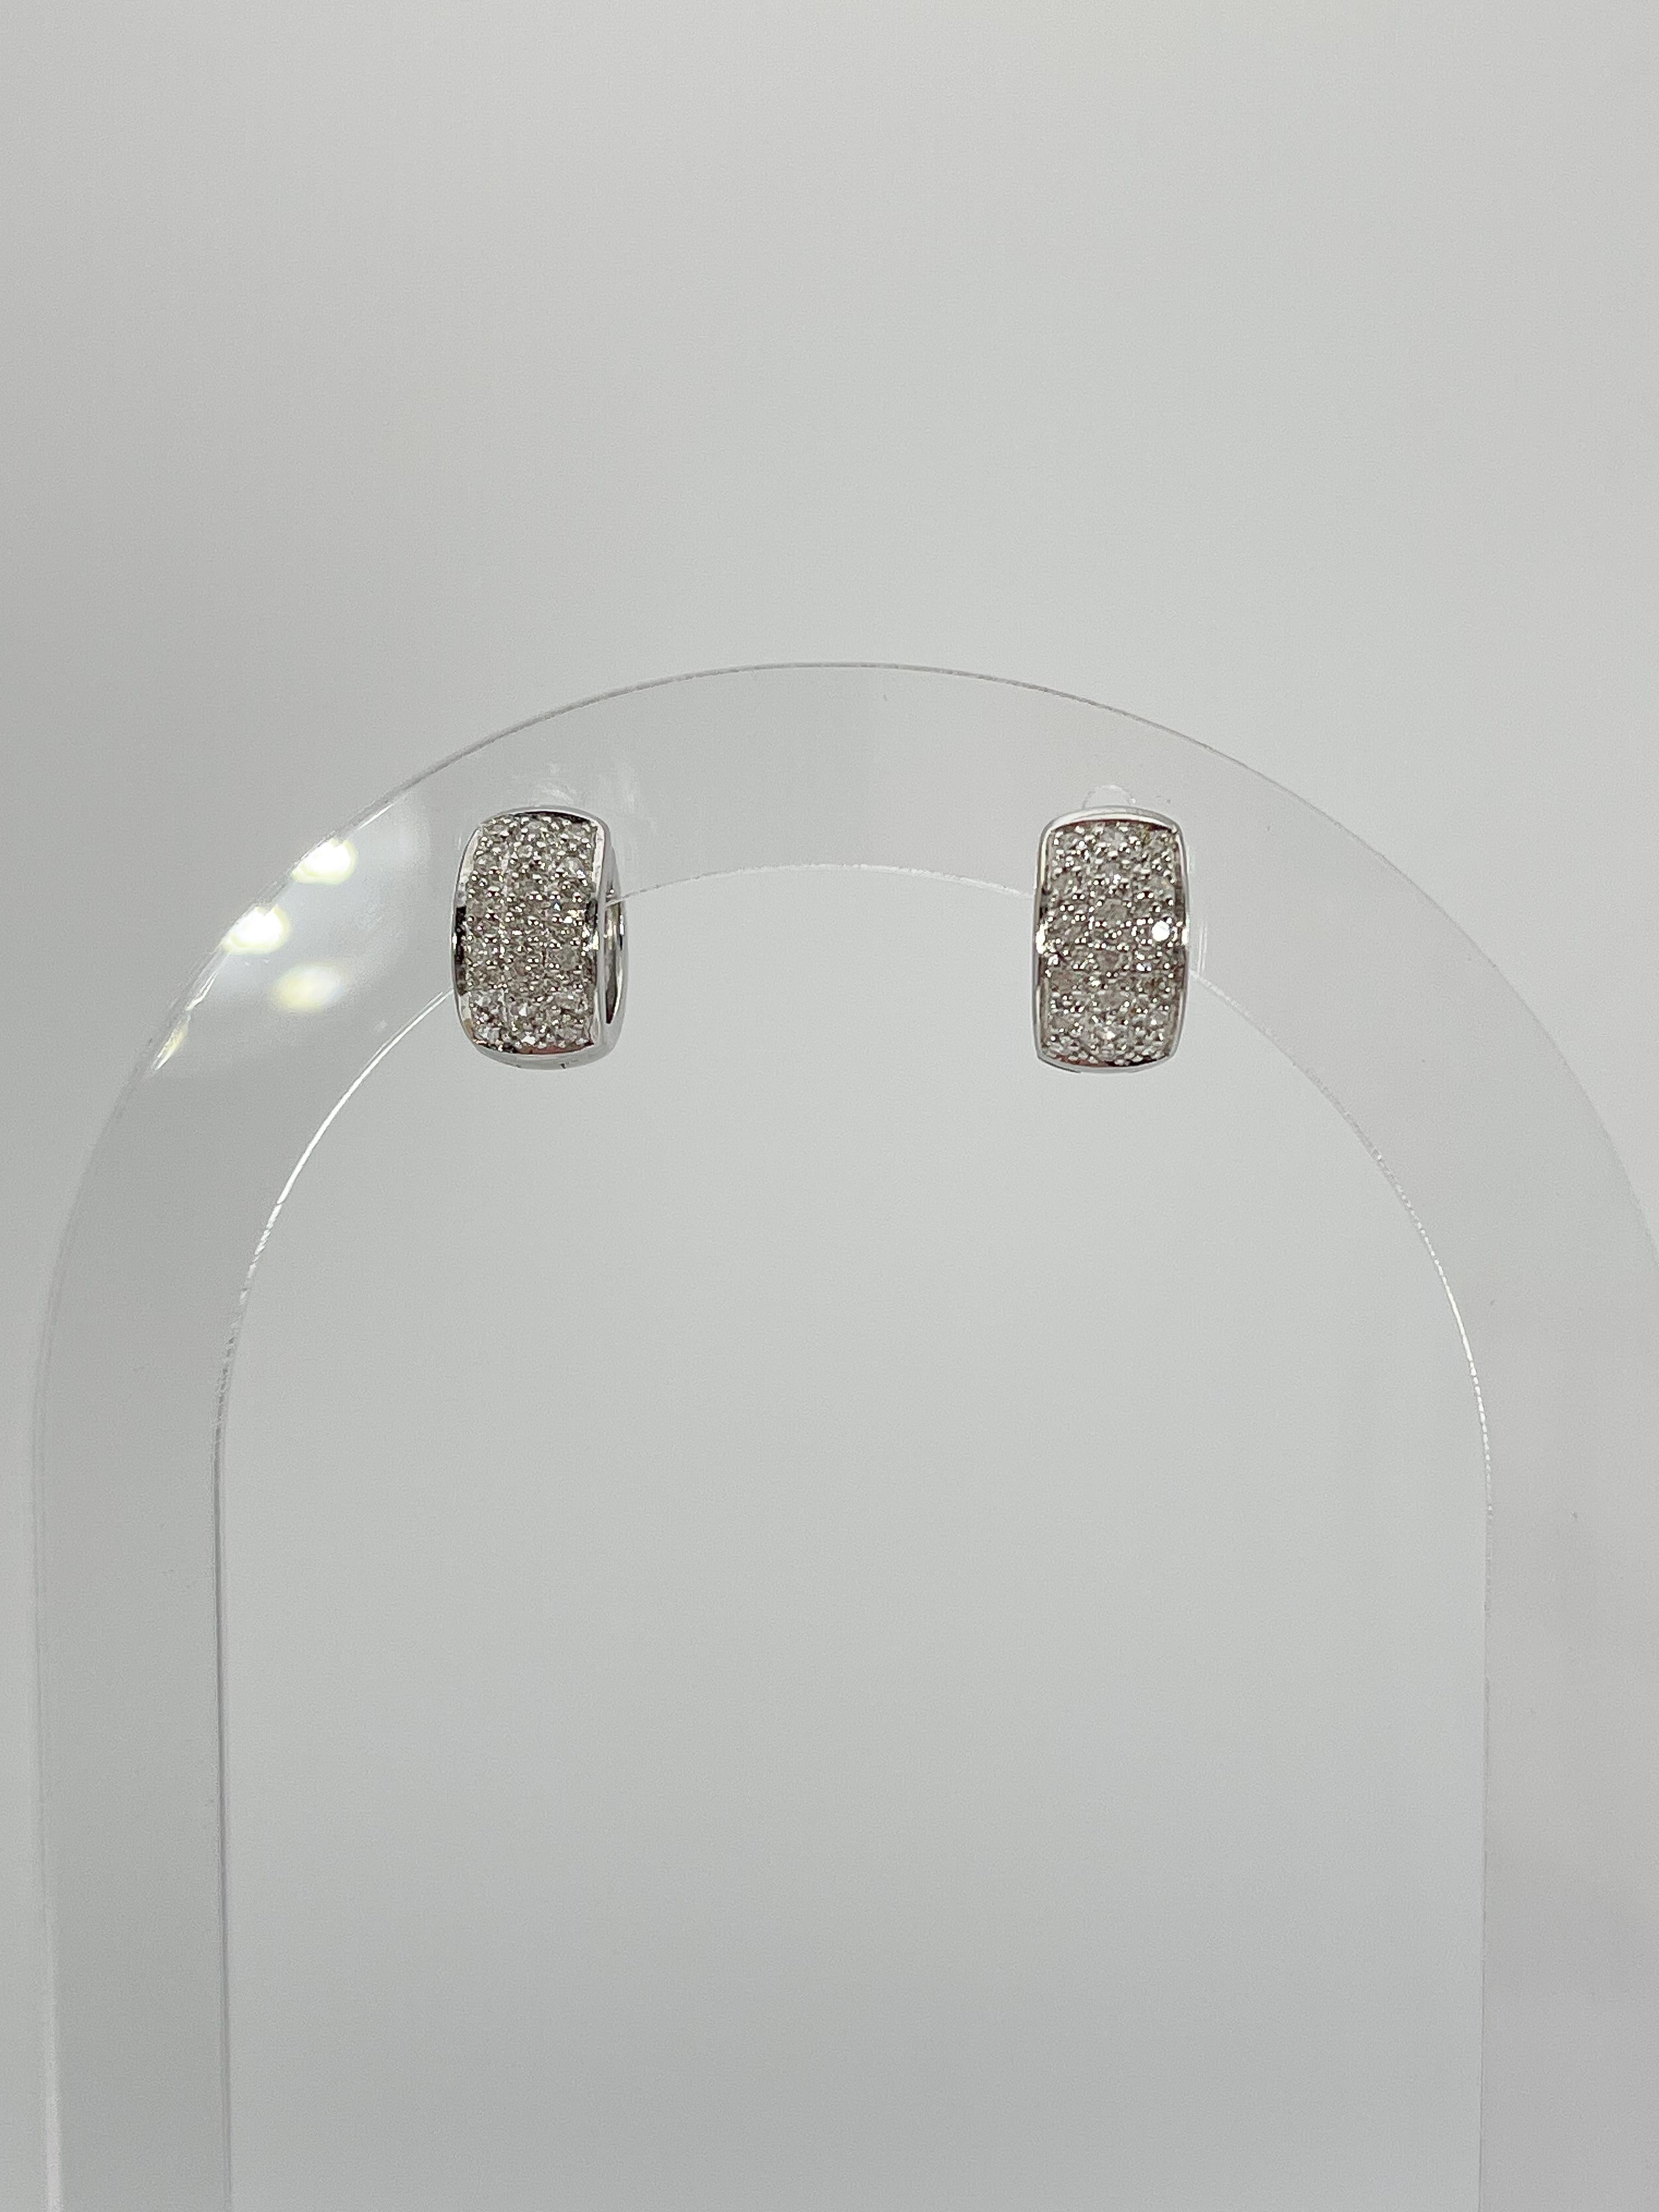 14k white gold diamond huggie hoop earrings. The width of the earrings is 7 mm, the inside diameter is 8.7 mm, and they have a total weight of 4.09 grams. 